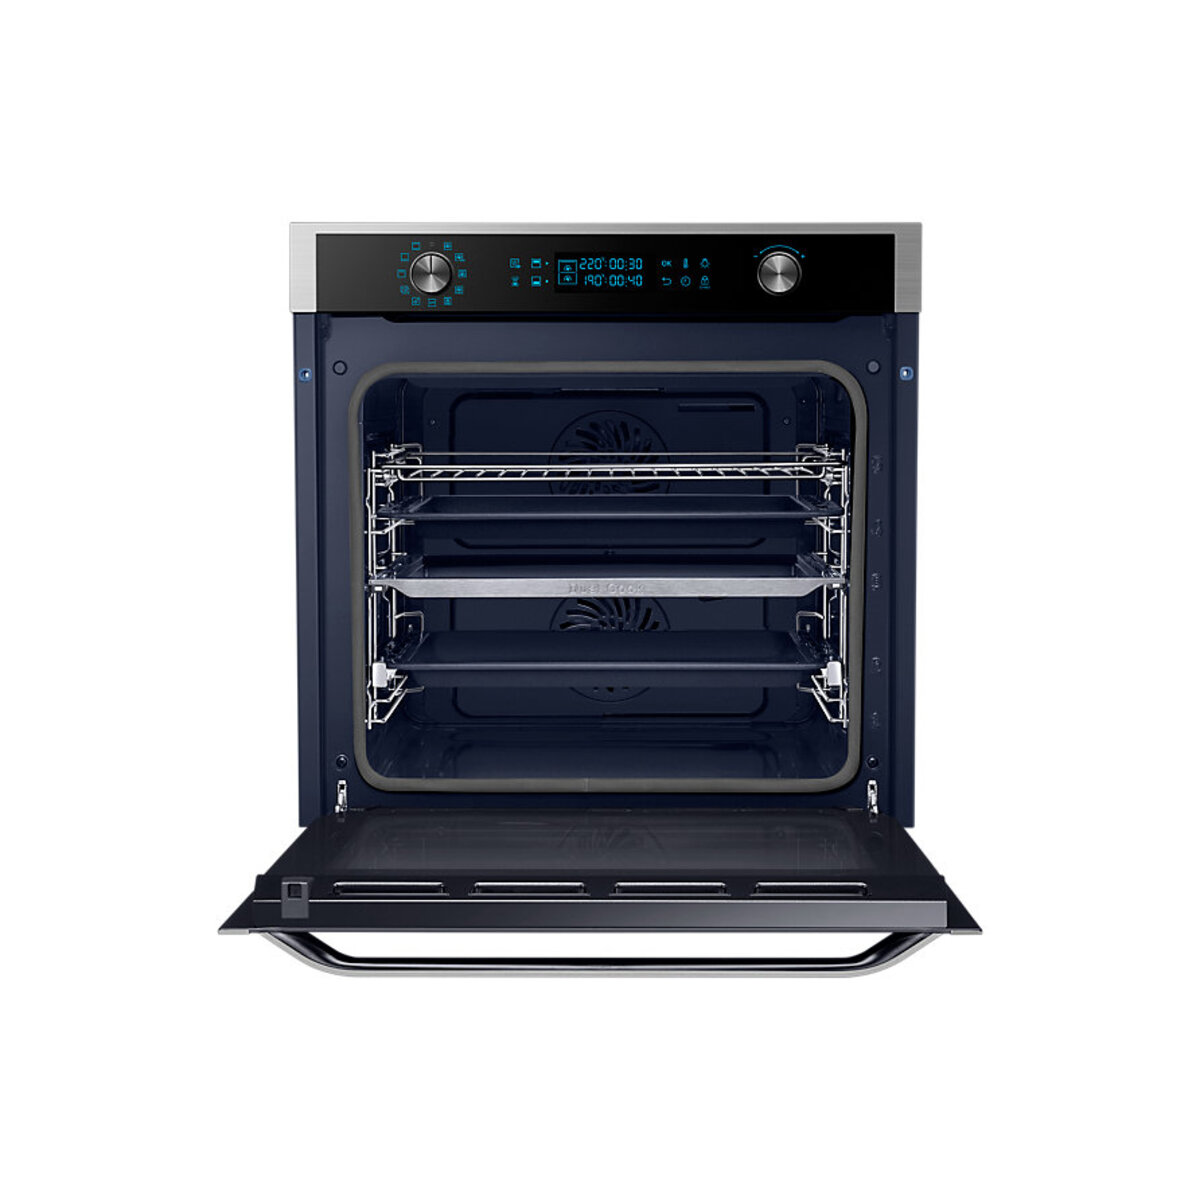 Samsung NV75J7570RS Electric Oven with Dual Cook, 75 Litre Capacity